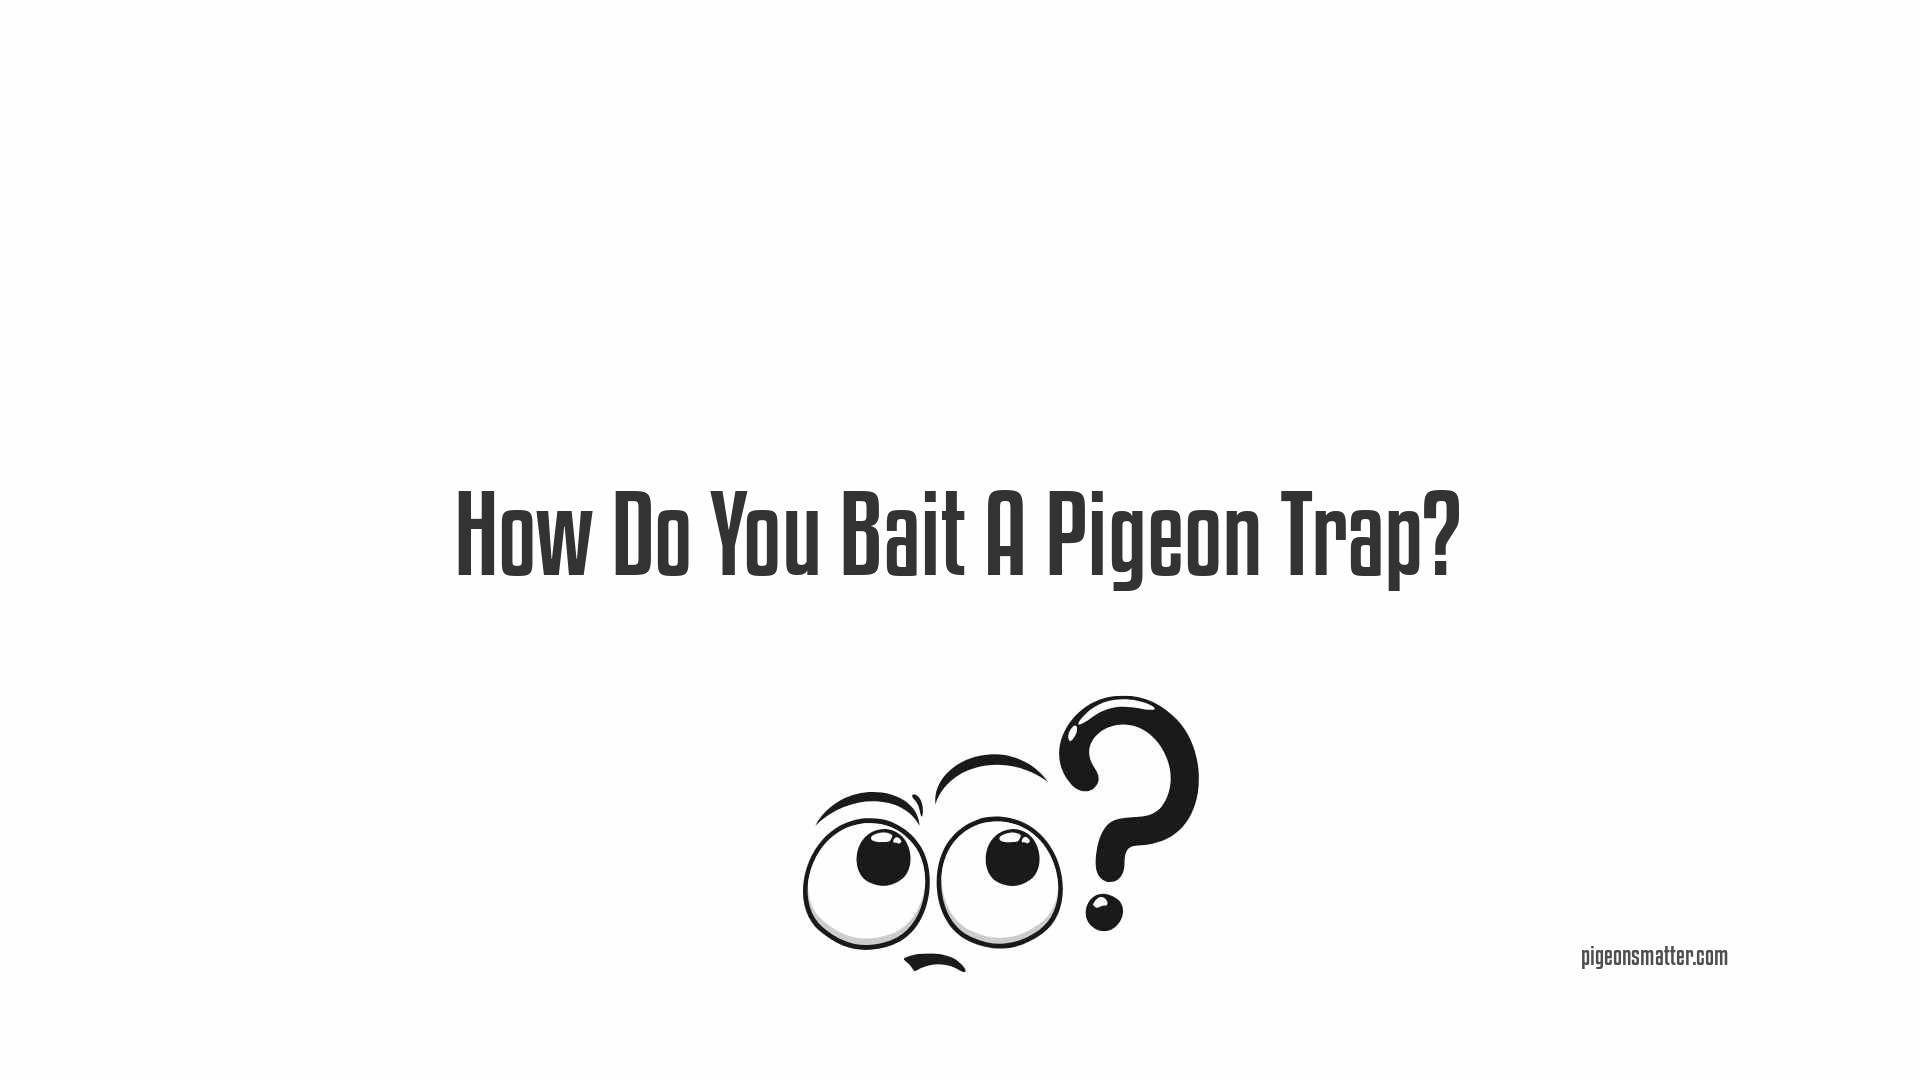 How Do You Bait A Pigeon Trap?